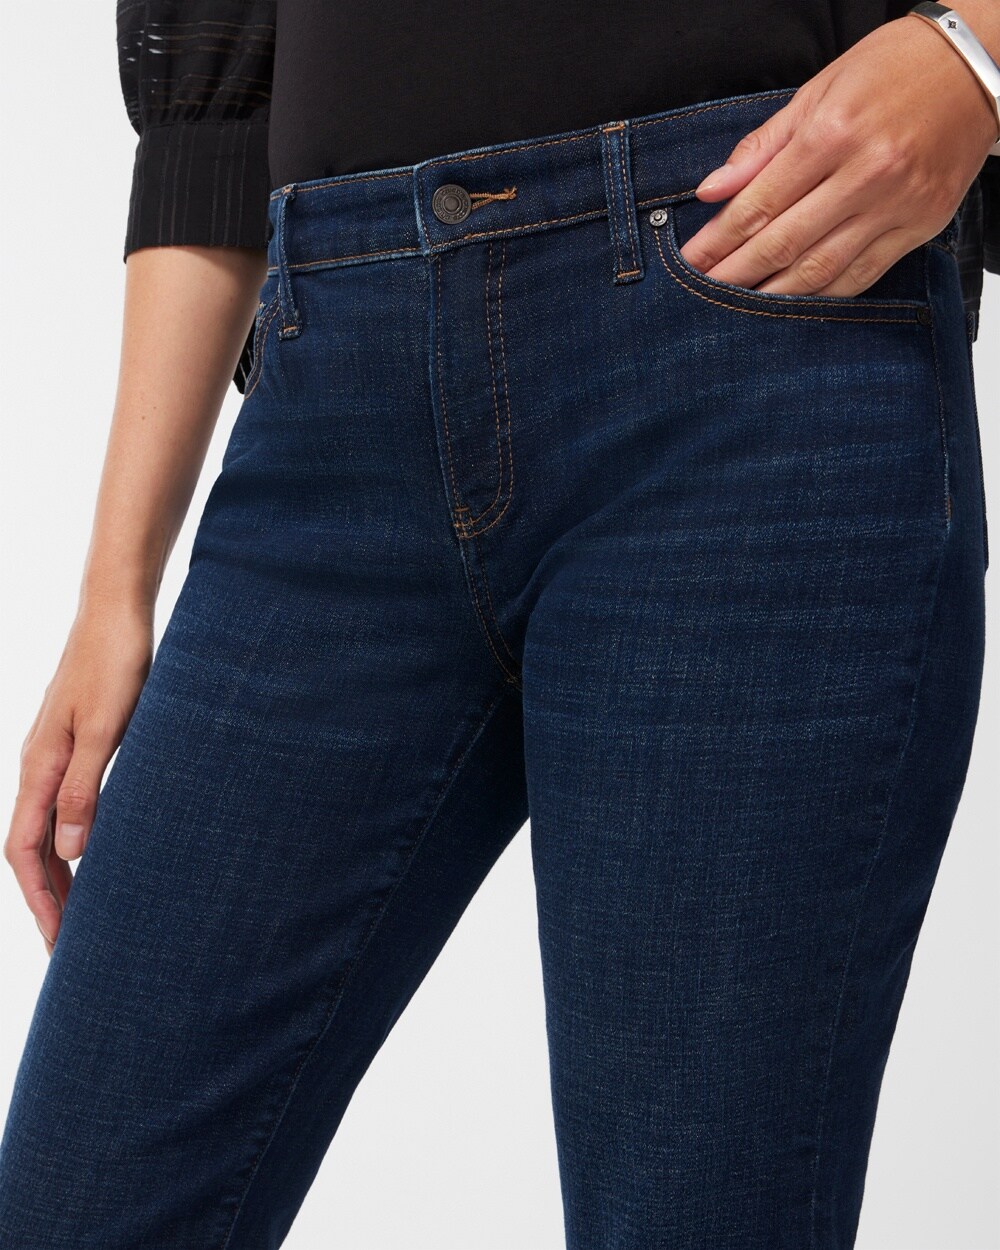 So Slimming Girlfriend Jeans - Chico's